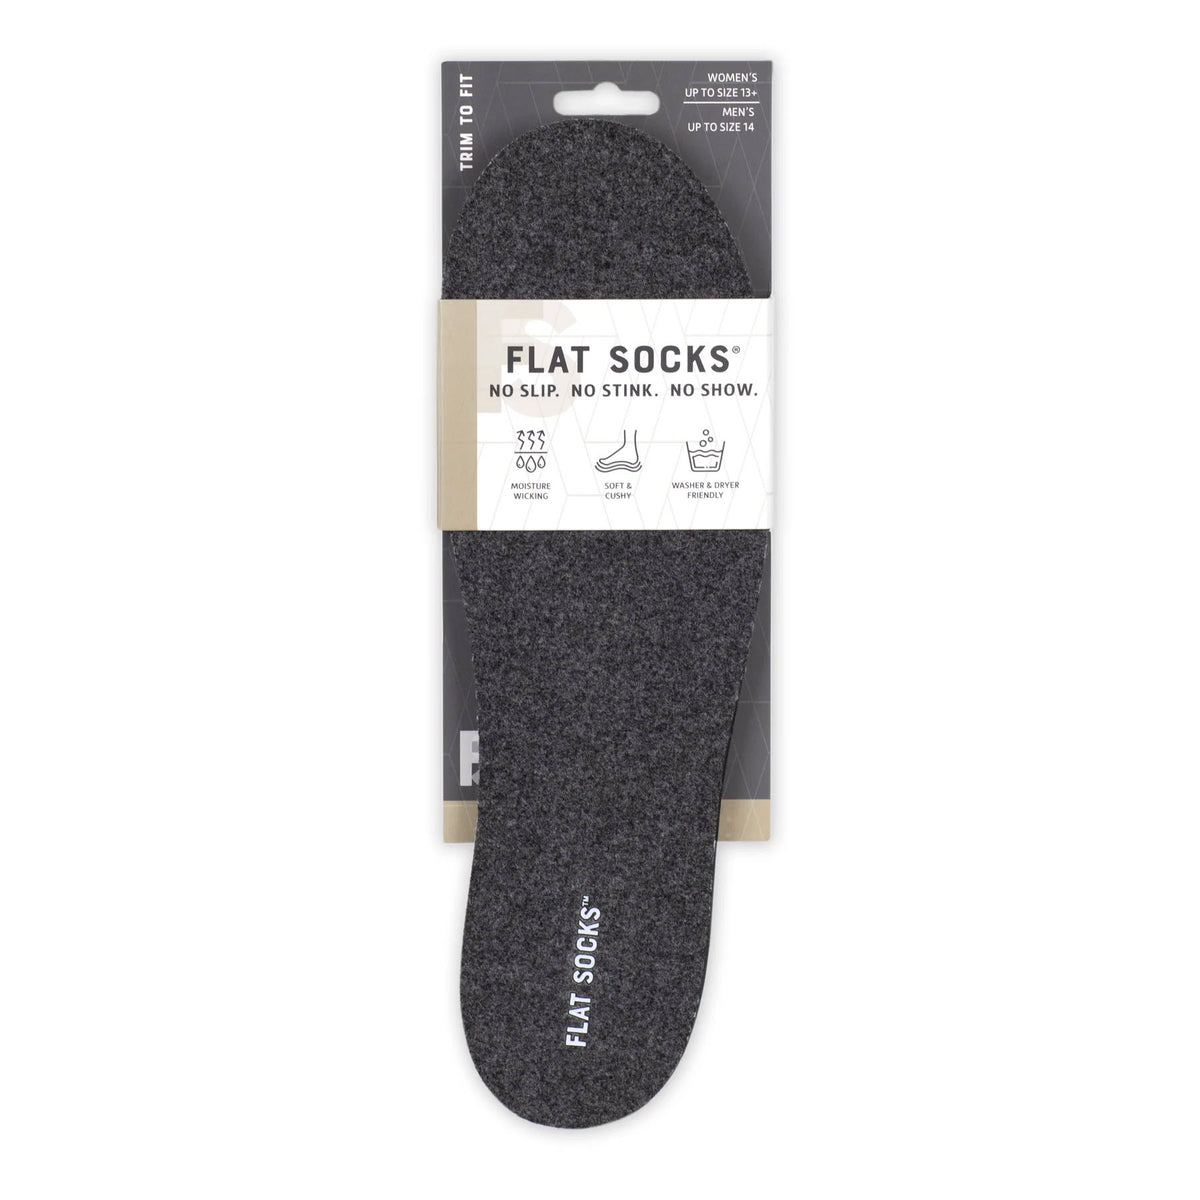 A pair of FLAT SOCKS DARK GRAY - MENS no-show socks displayed on a cardboard hanger, labeled &quot;FLAT SOCKS&quot; with text detailing features like &quot;no slip, no stink, moisture-wicking.